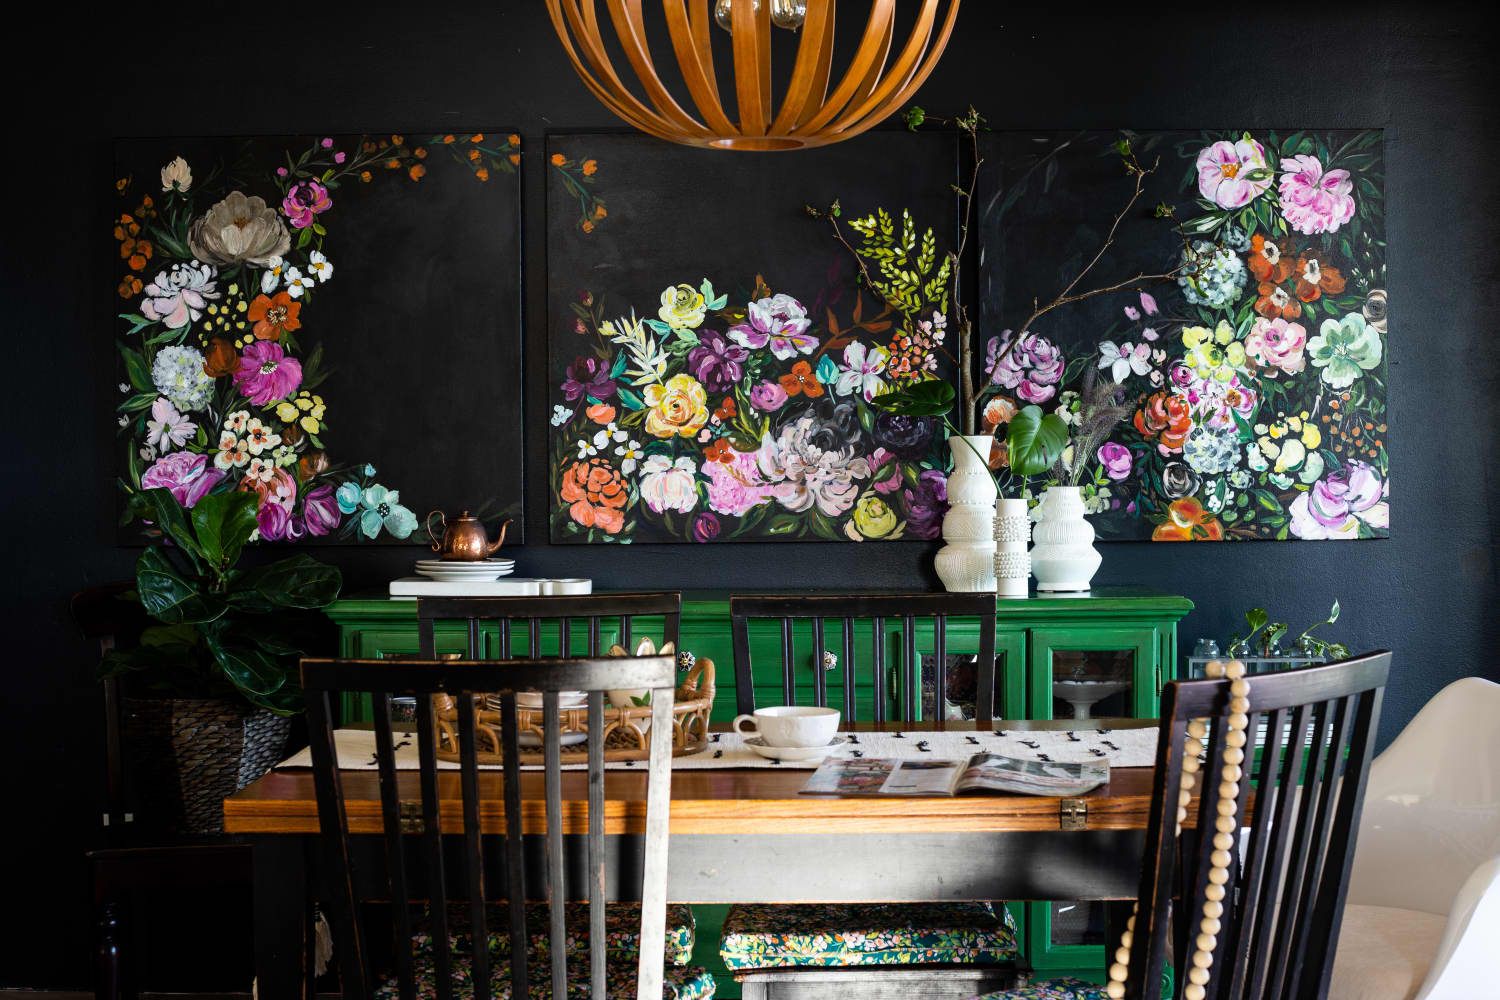 This Arizona Home Is Filled With Utterly Fantastic Hand-Painted Florals